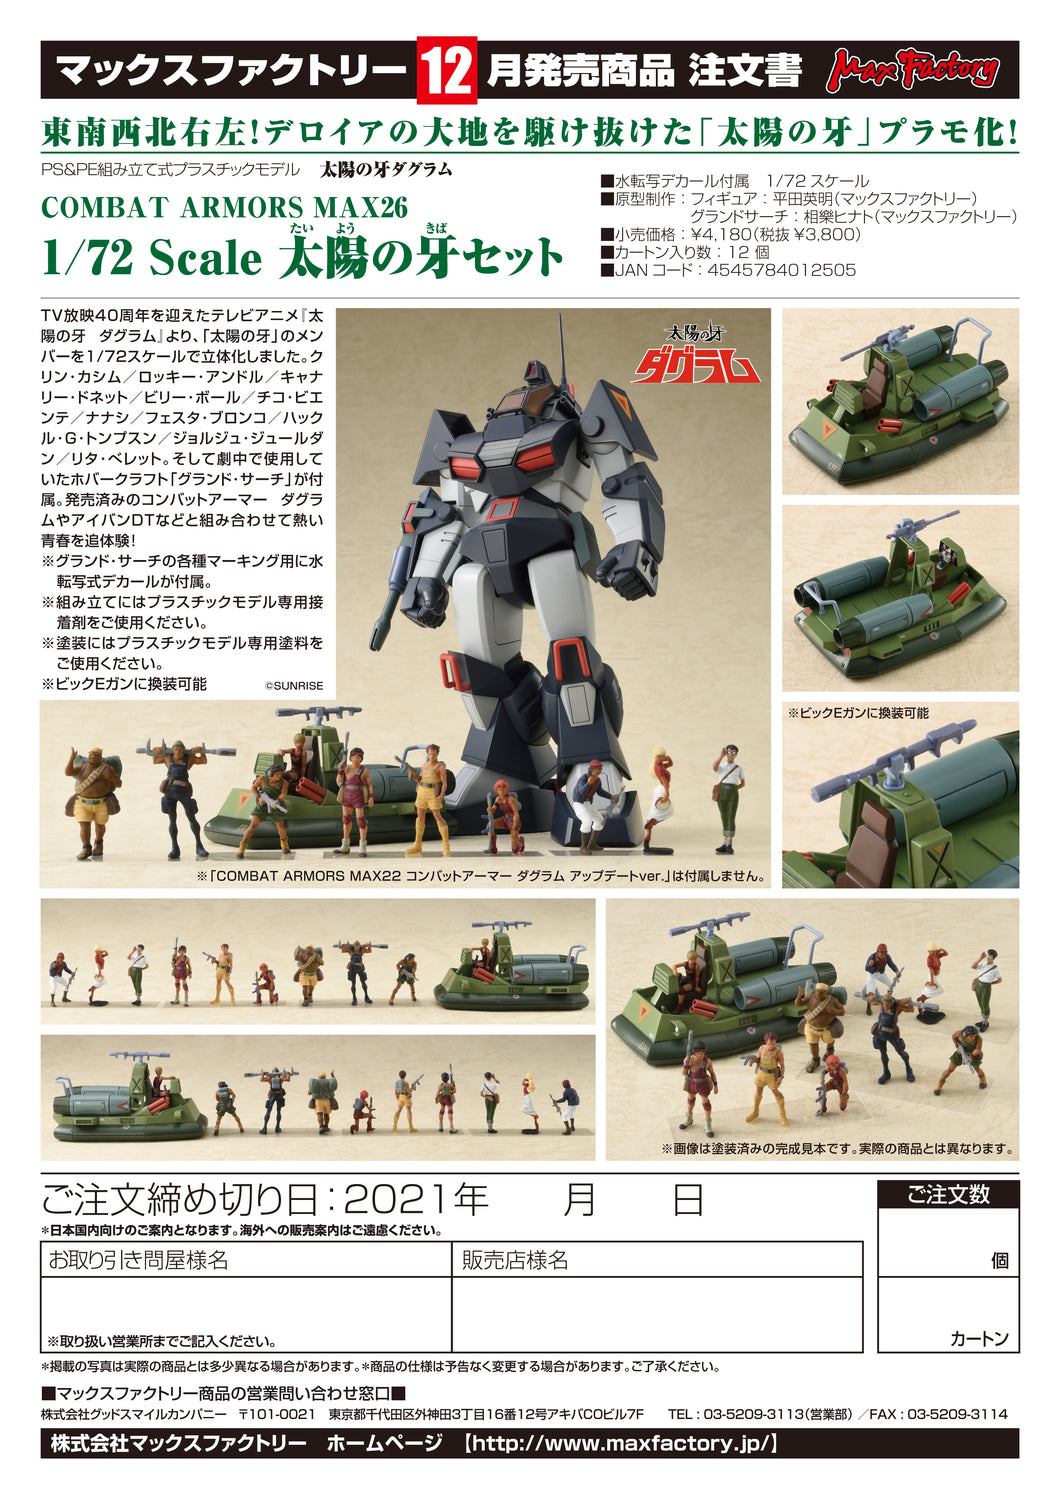 PRE-ORDER COMBAT ARMORS MAX26 1/72 Scale Fang of the Sun Set